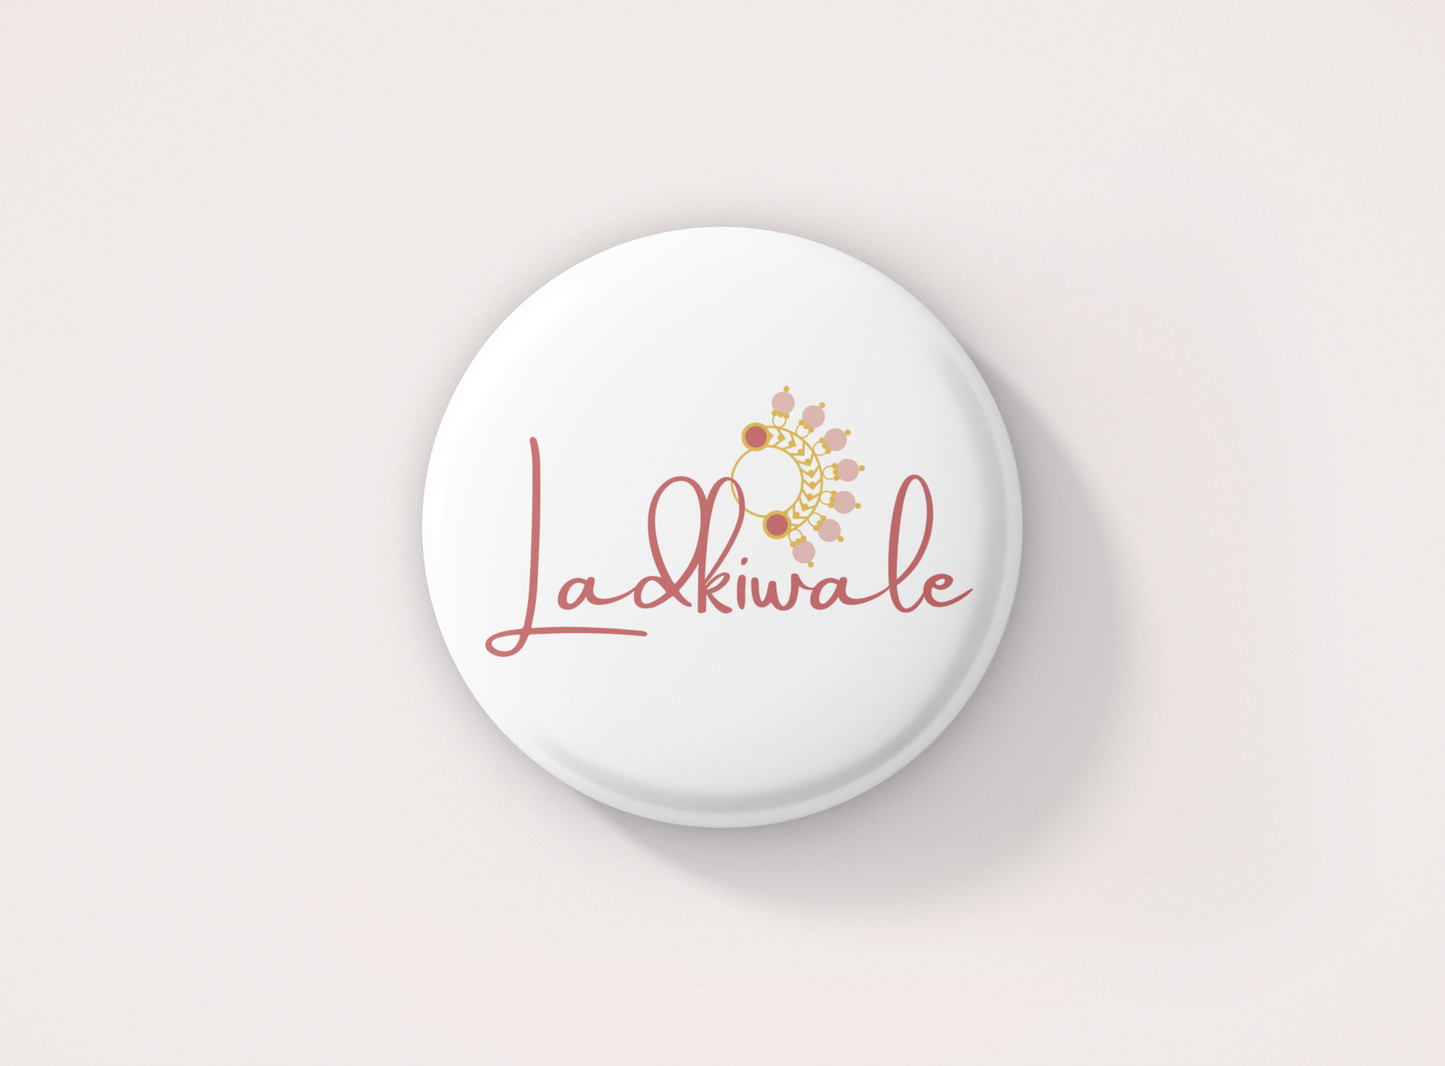 Ladkiwale! Pin Button Badge - Pack of 1